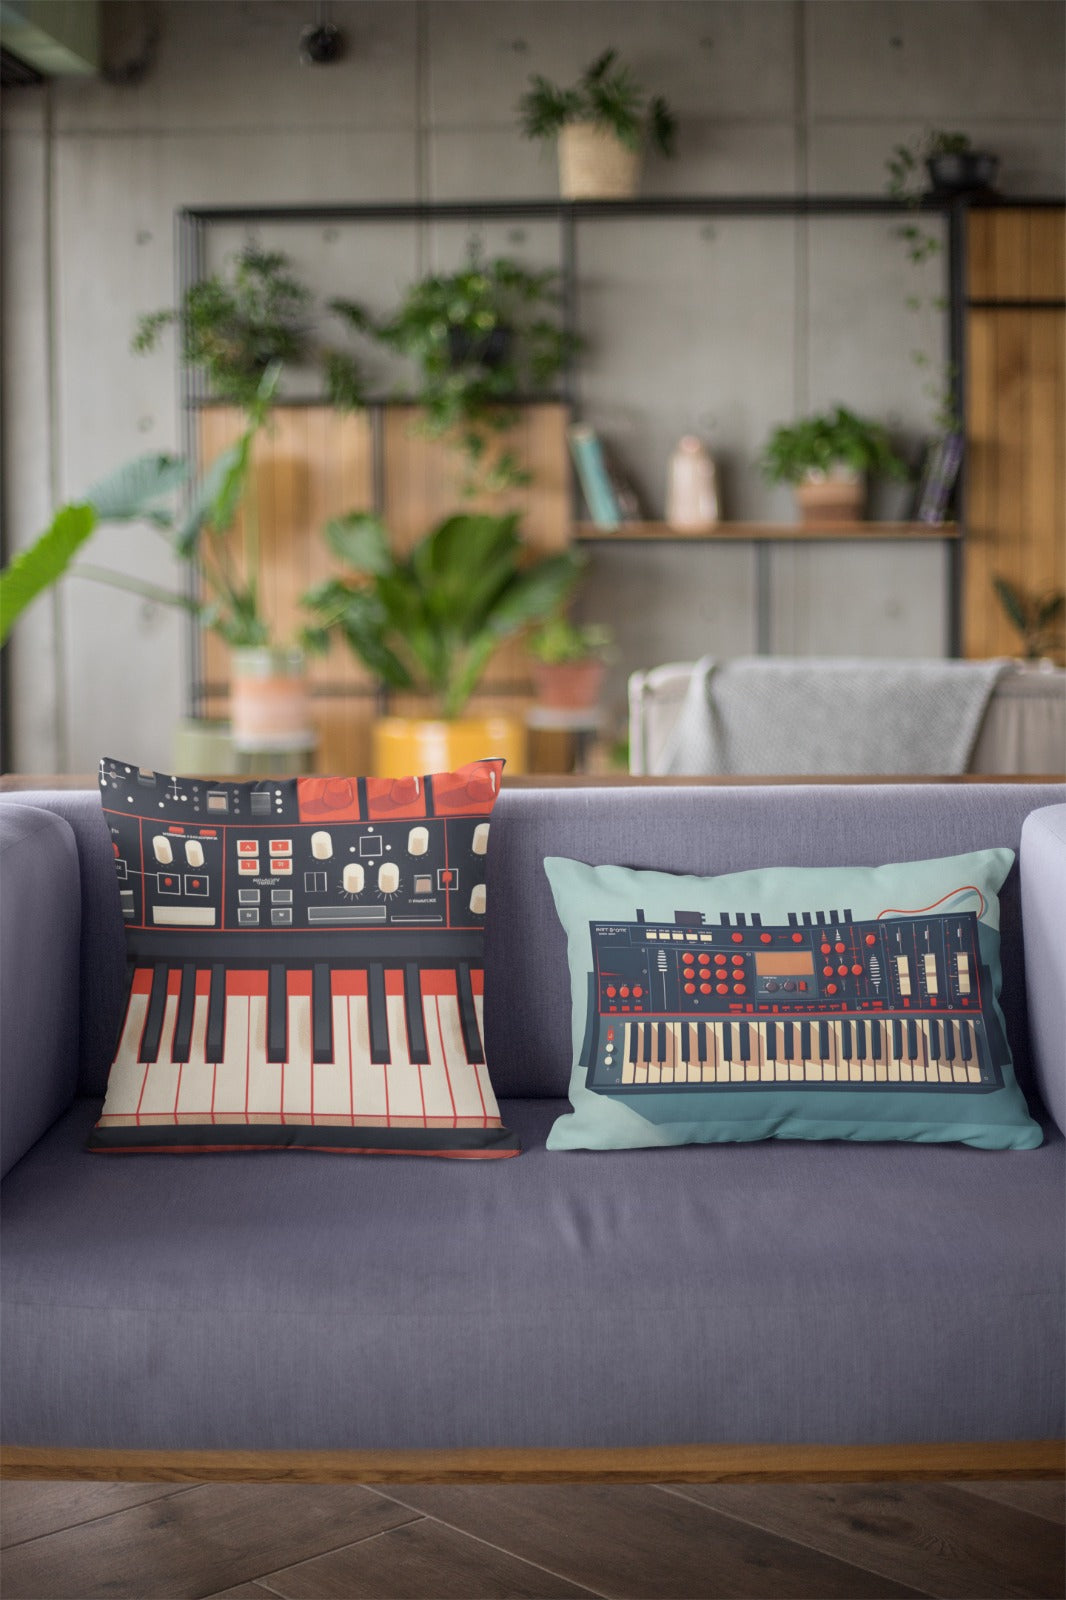 Two decorative pillows designed to resemble music production equipment, one with a keyboard and the other with a synthesizer, resting on a modern couch in a cozy living room with plants and shelves in the background.